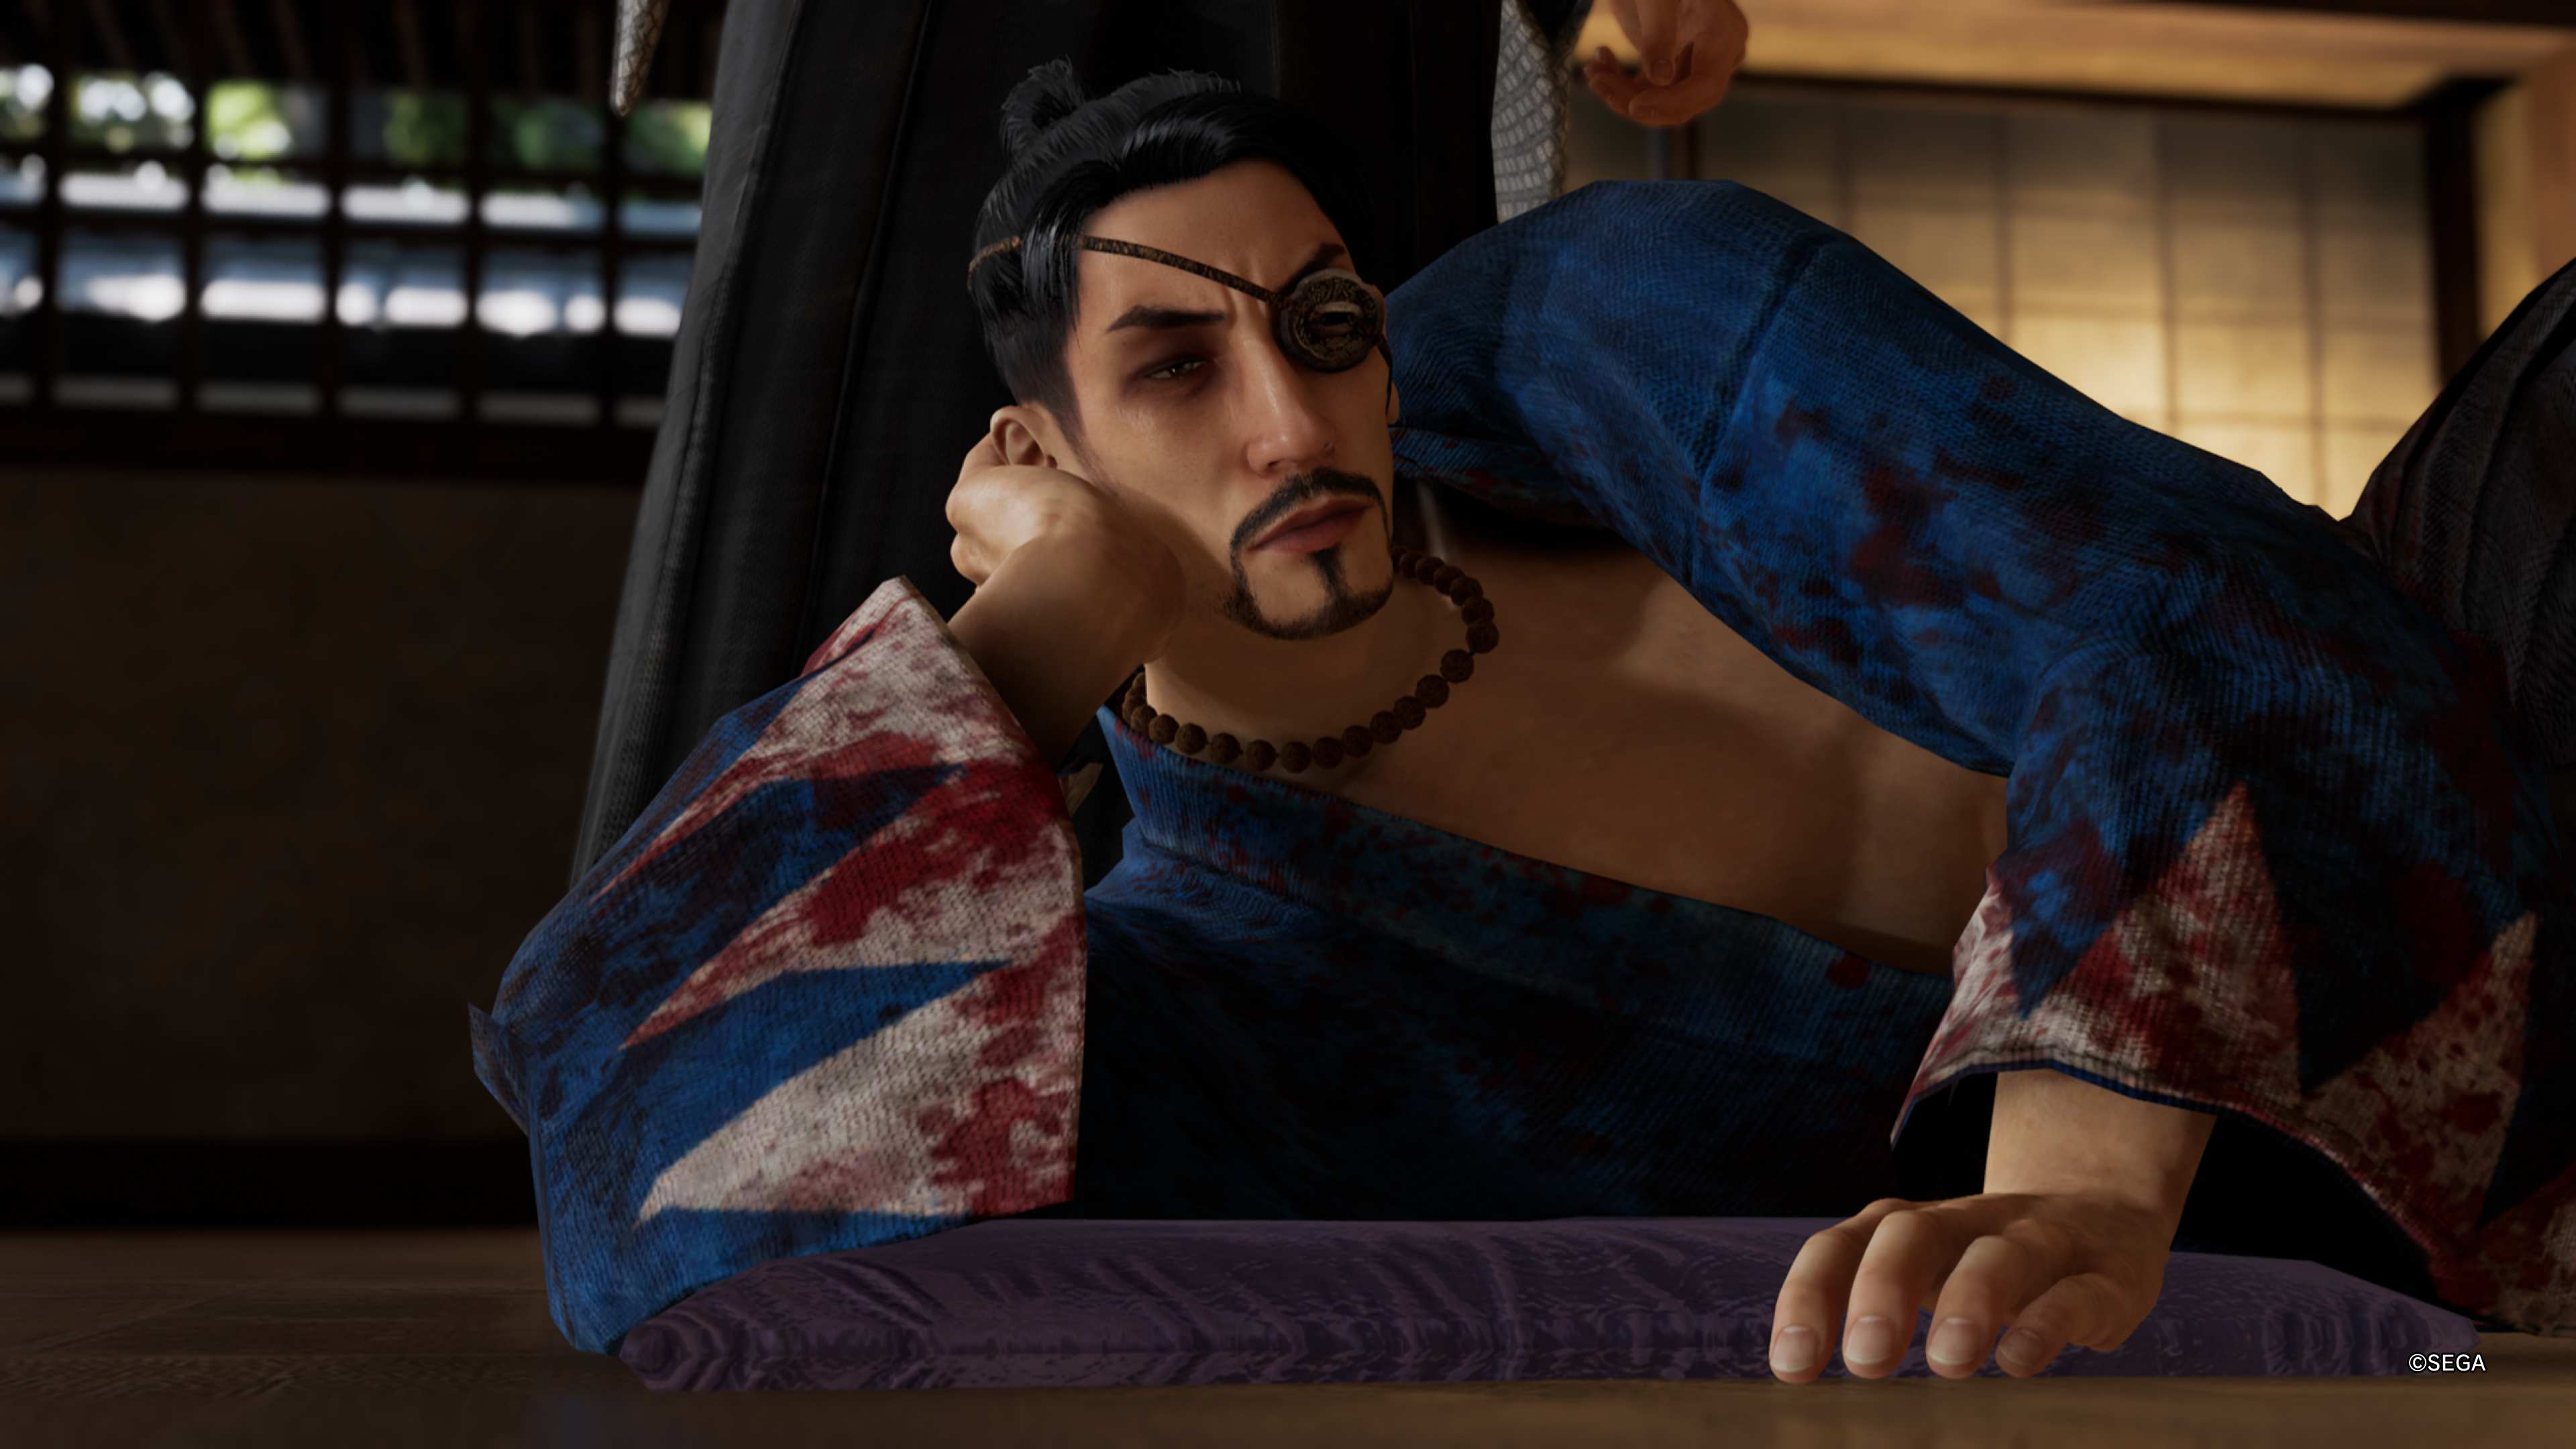 Just like Dragon Ishin comment - Okita Soji leaning on his elbow suggestively